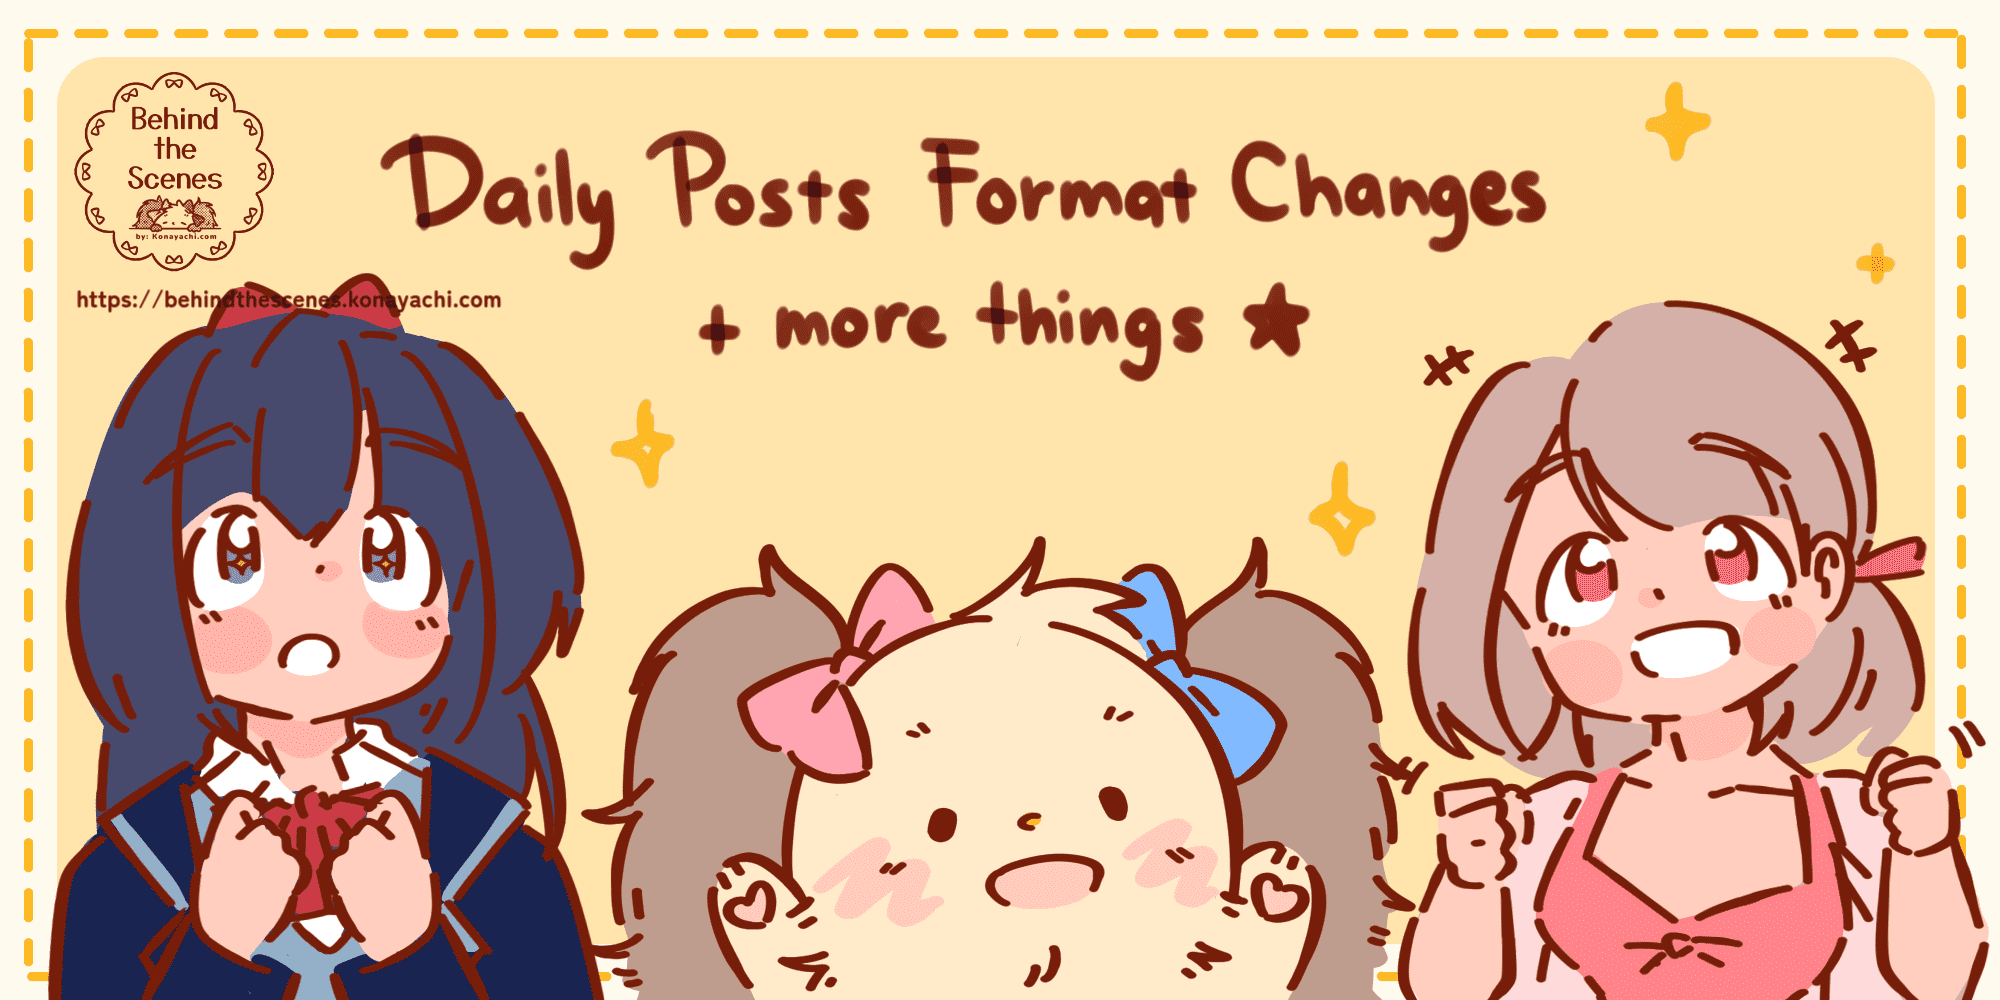 Daily Posts Format Changes + more things